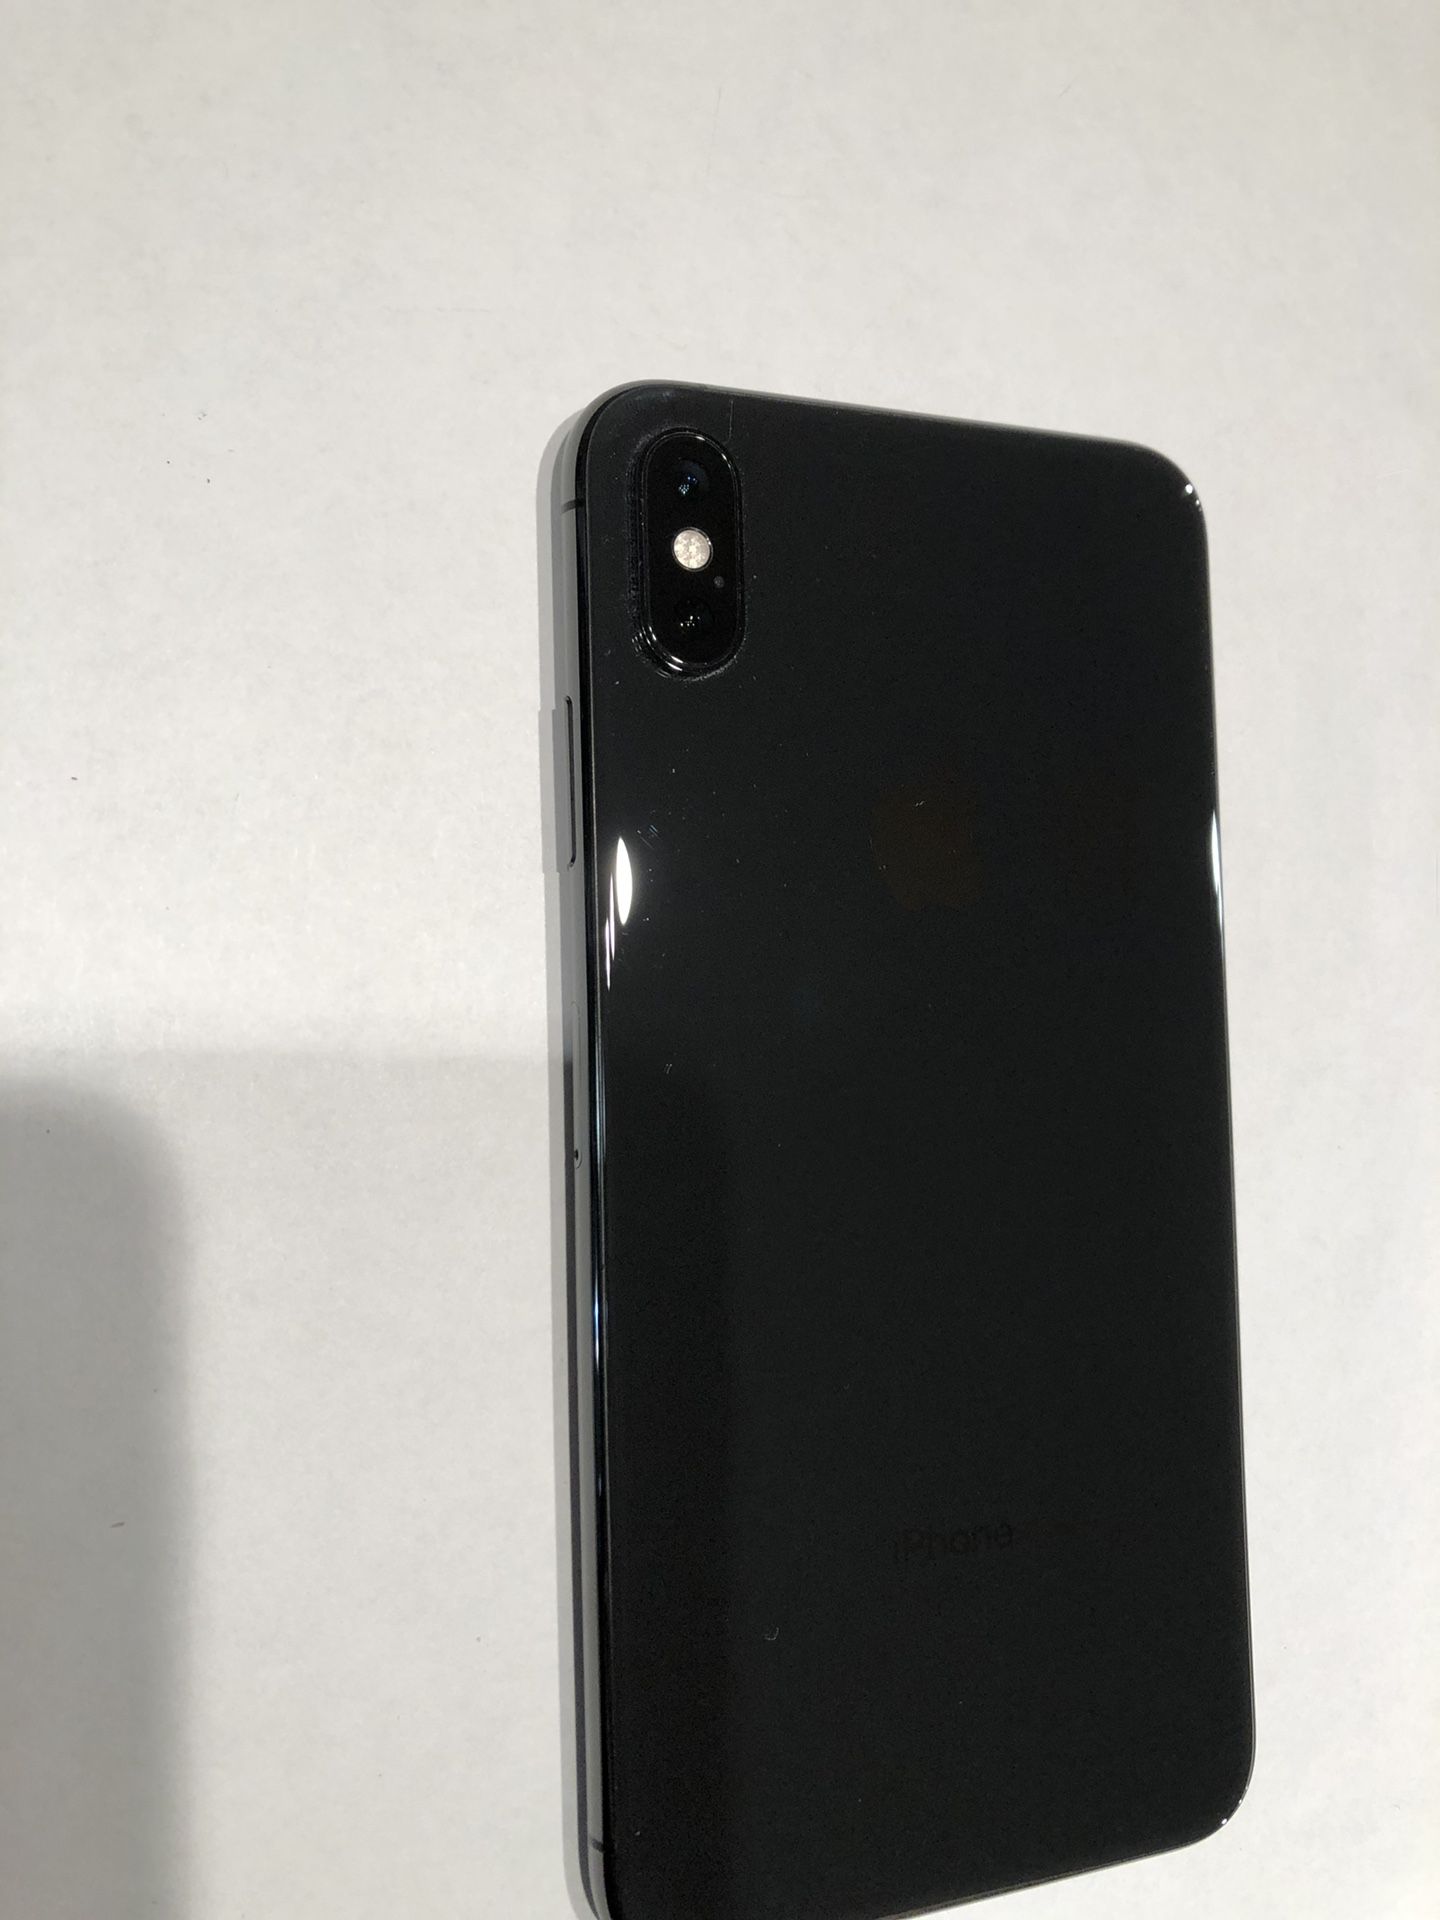 Apple iPhone Xs Max, 256GB, Space Gray - Only works with spectrum